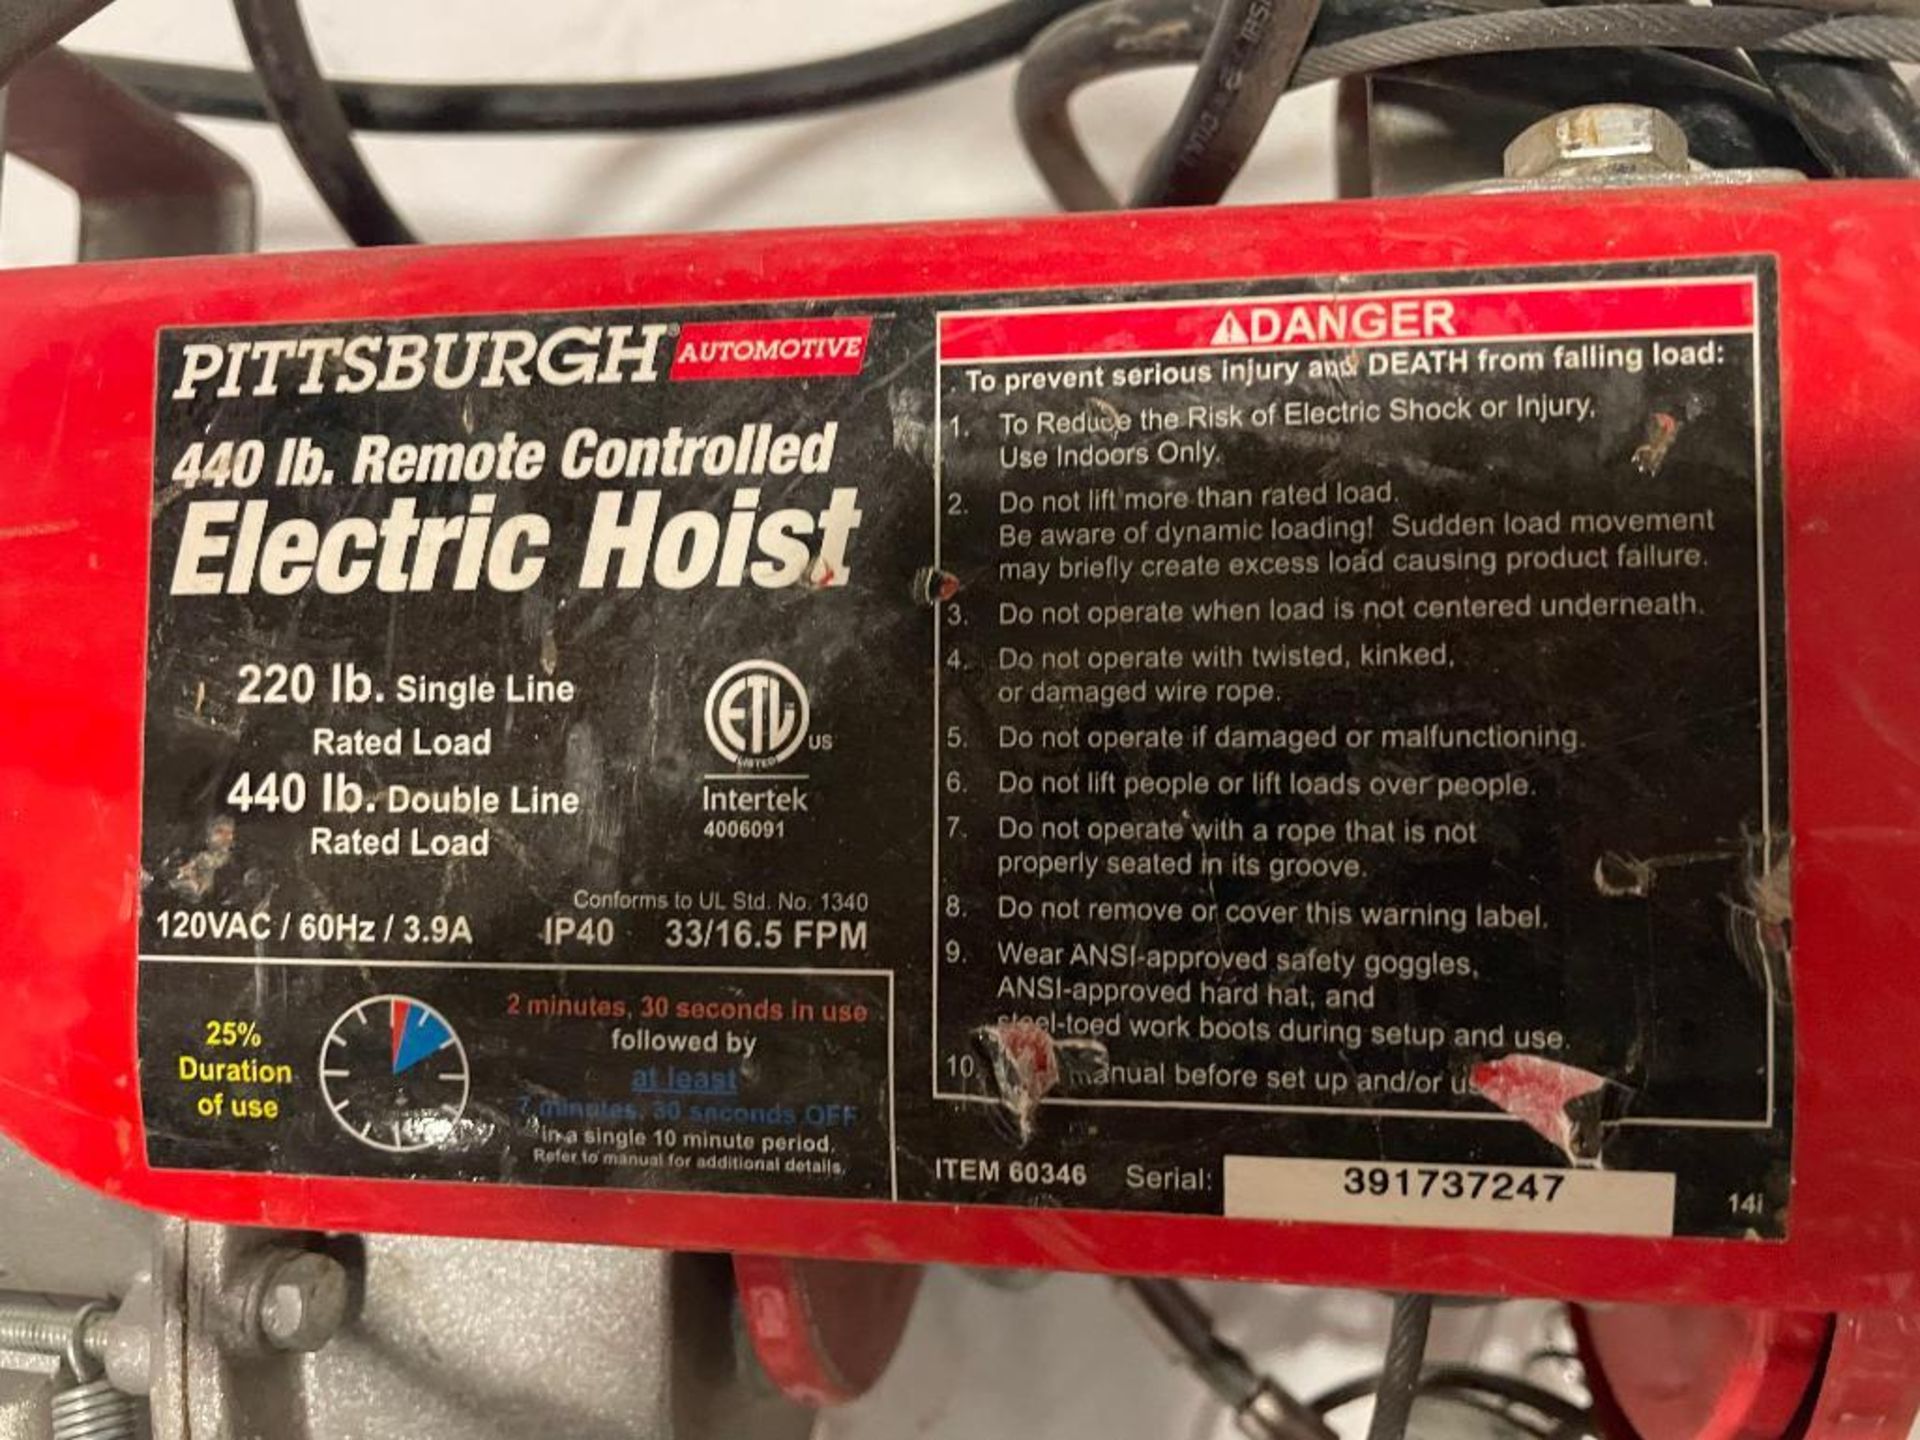 Pittsburgh 440 # Remote Controlled Electric Hoist, Serial #391737247, 220# Single Line & 440# Double - Image 3 of 4